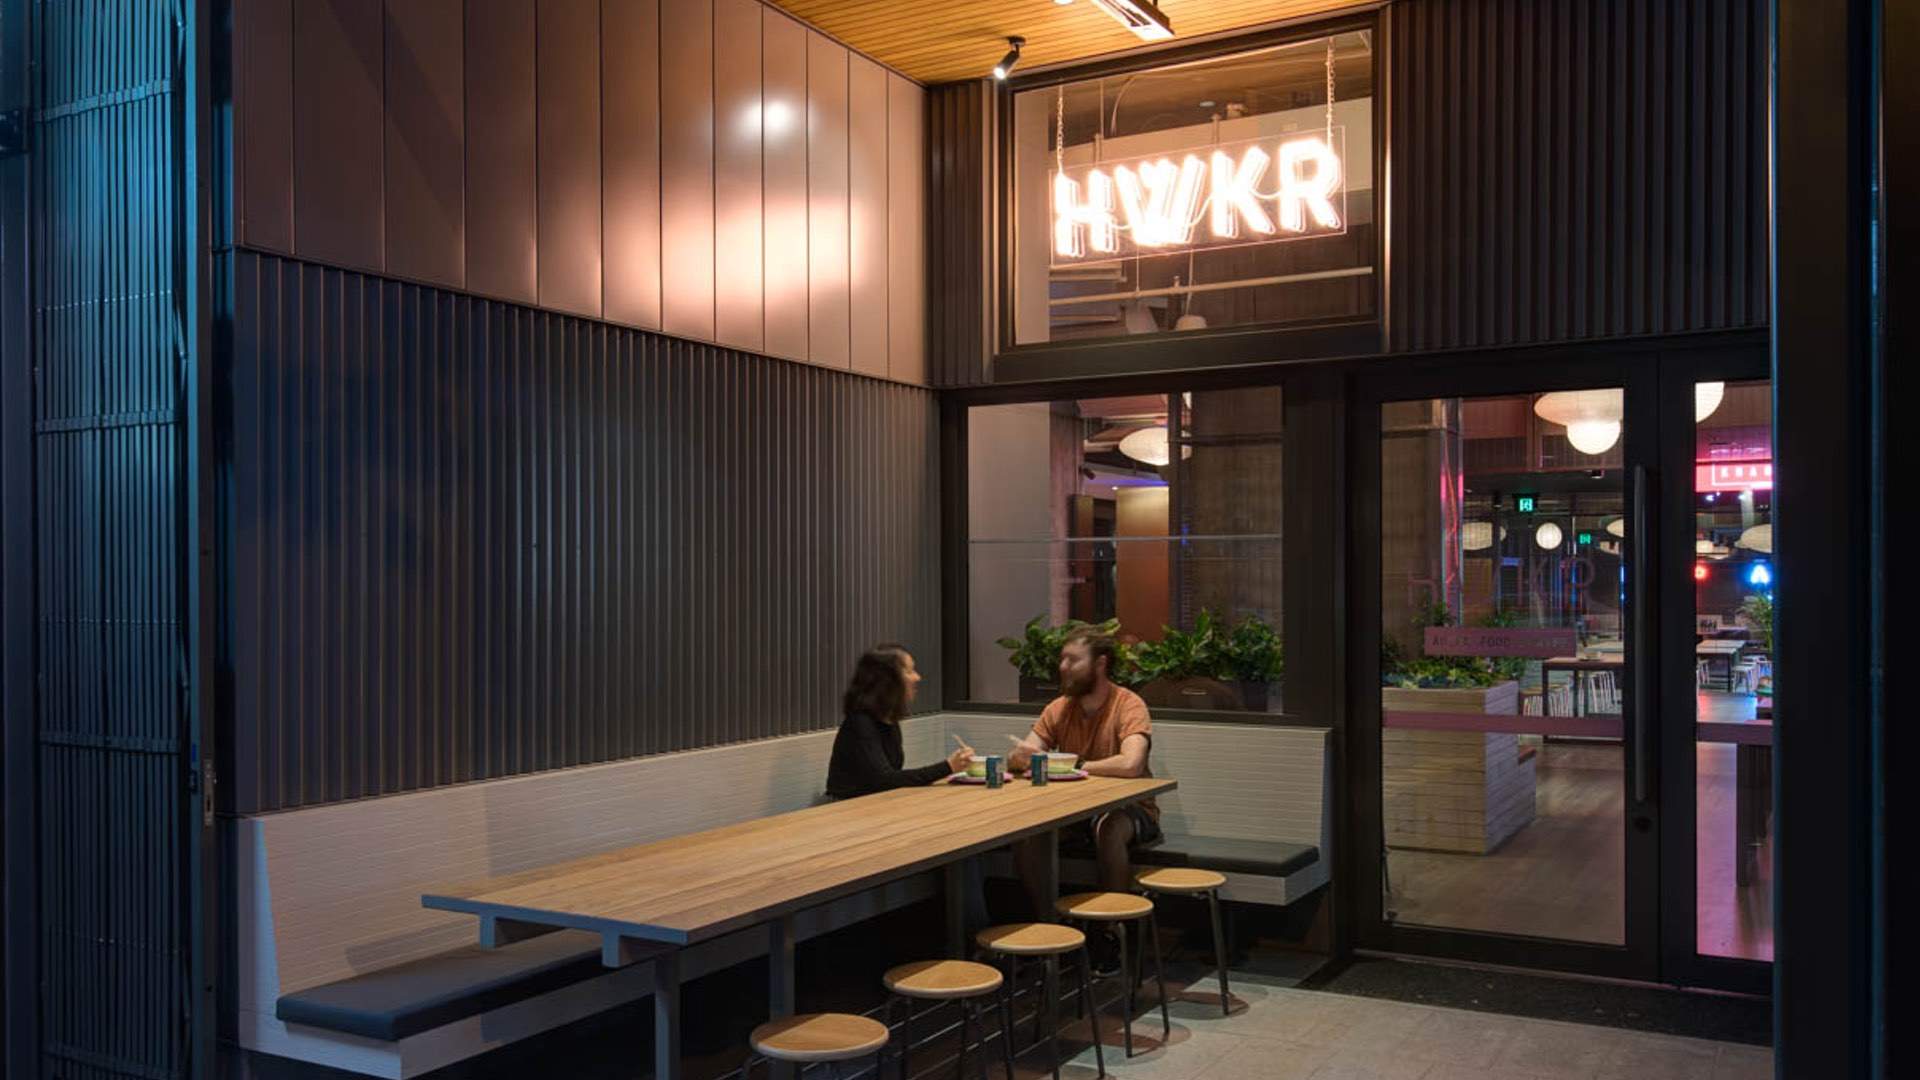 HWKR Is Melbourne's Modern New Neon-Lit Rotating Hawker-Style Market